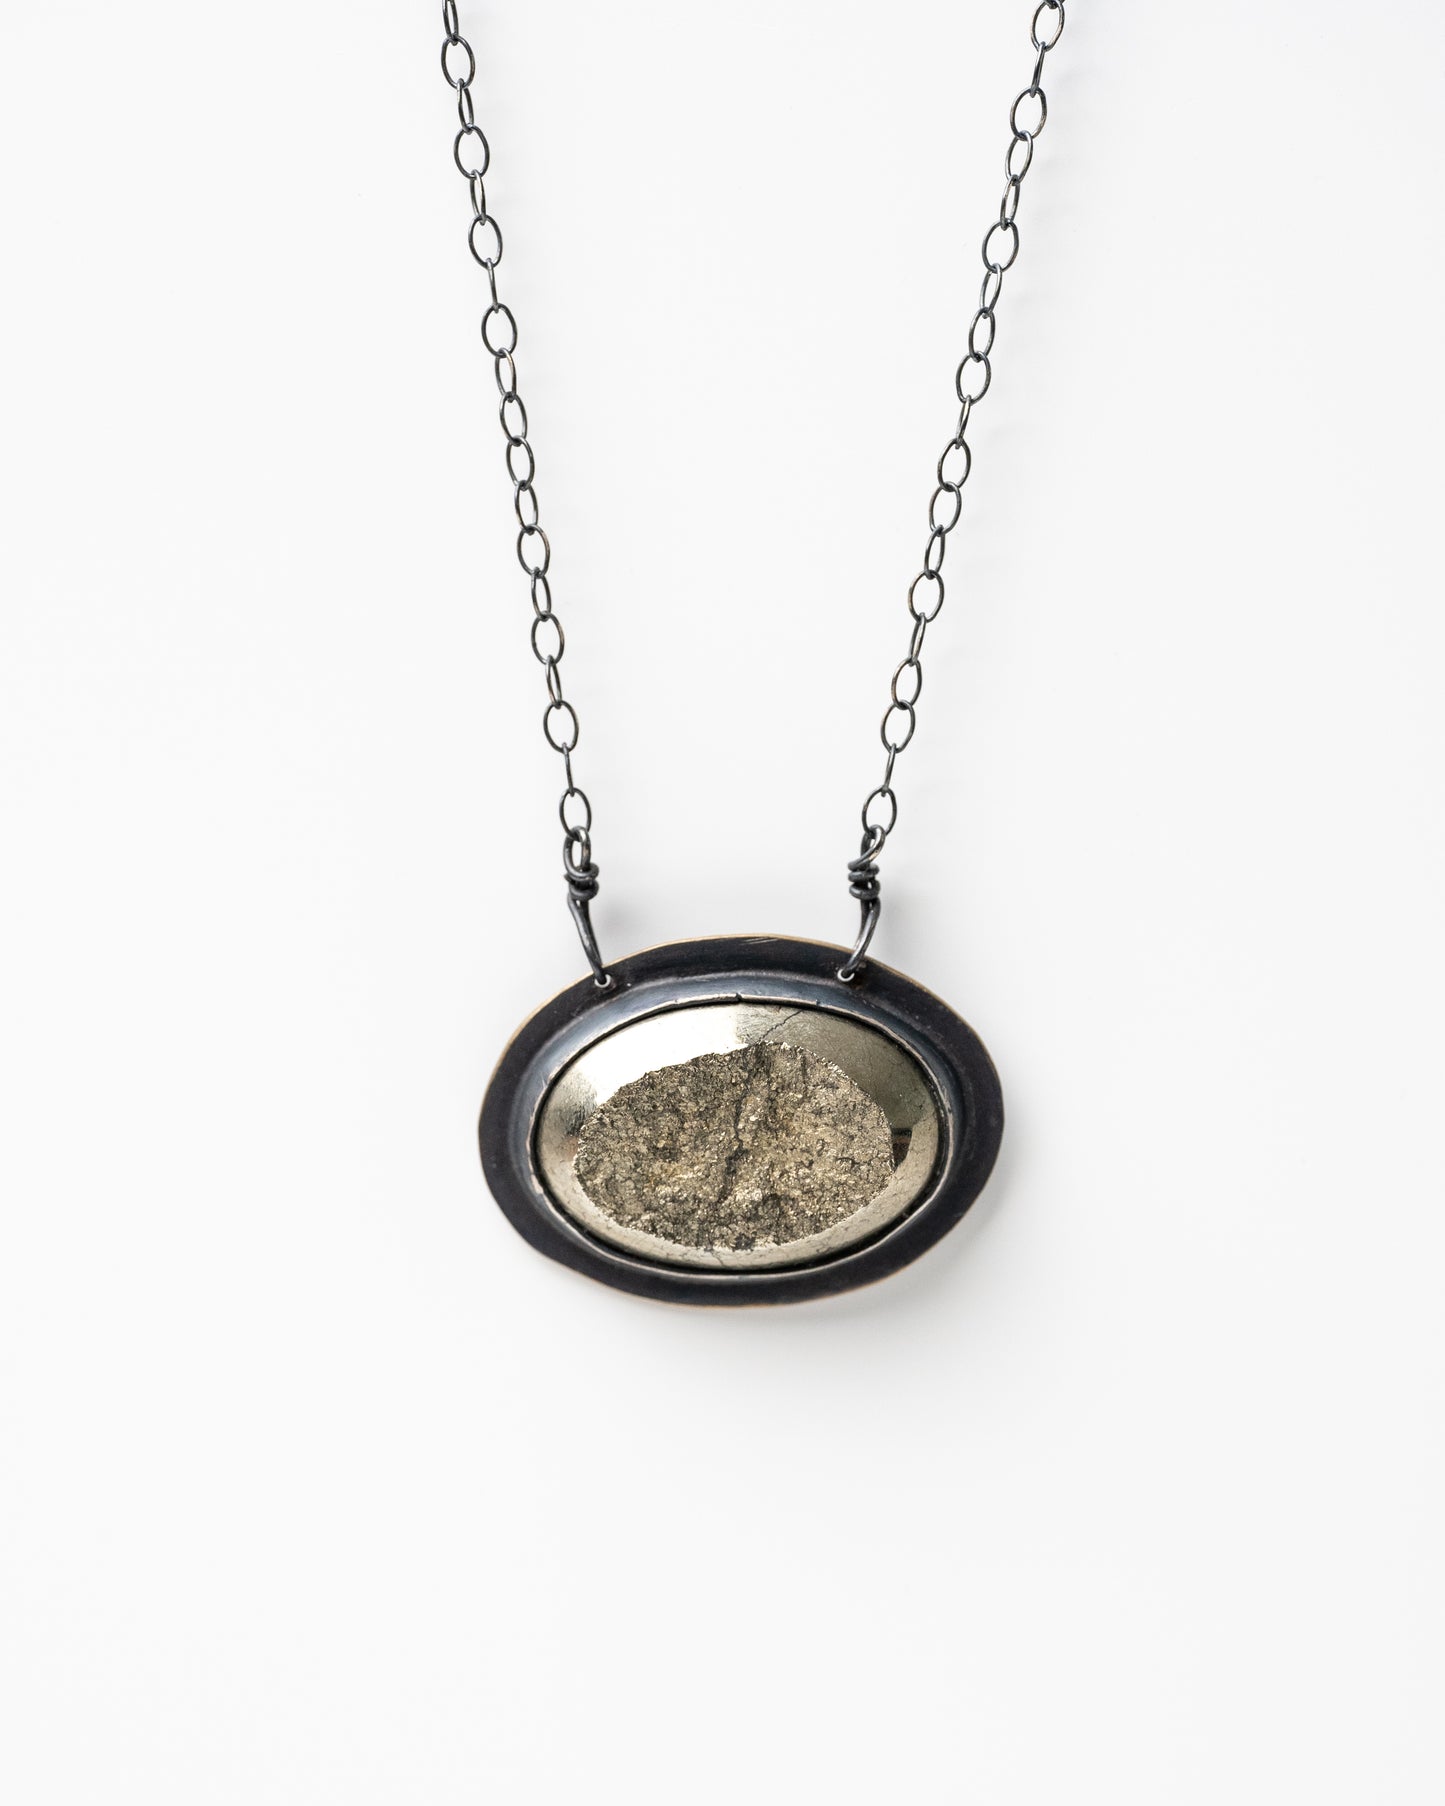 Prosperous Necklace: Handmade Sterling Silver Necklace with Half Raw Pyrite Stone